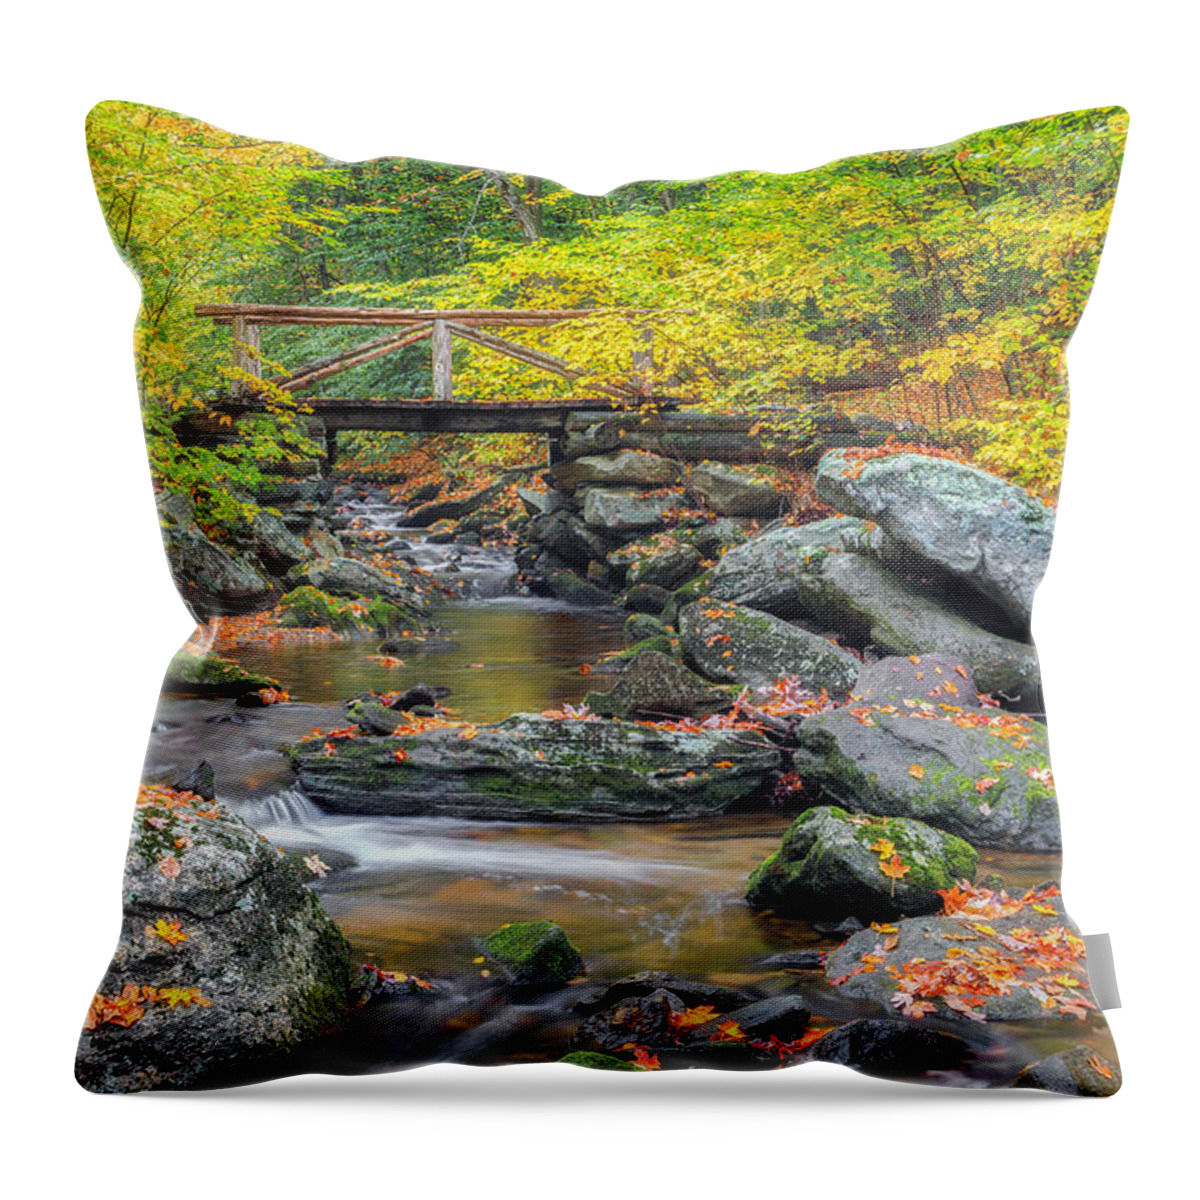 Bridge Throw Pillow featuring the photograph Macedonia Brook by Bill Wakeley